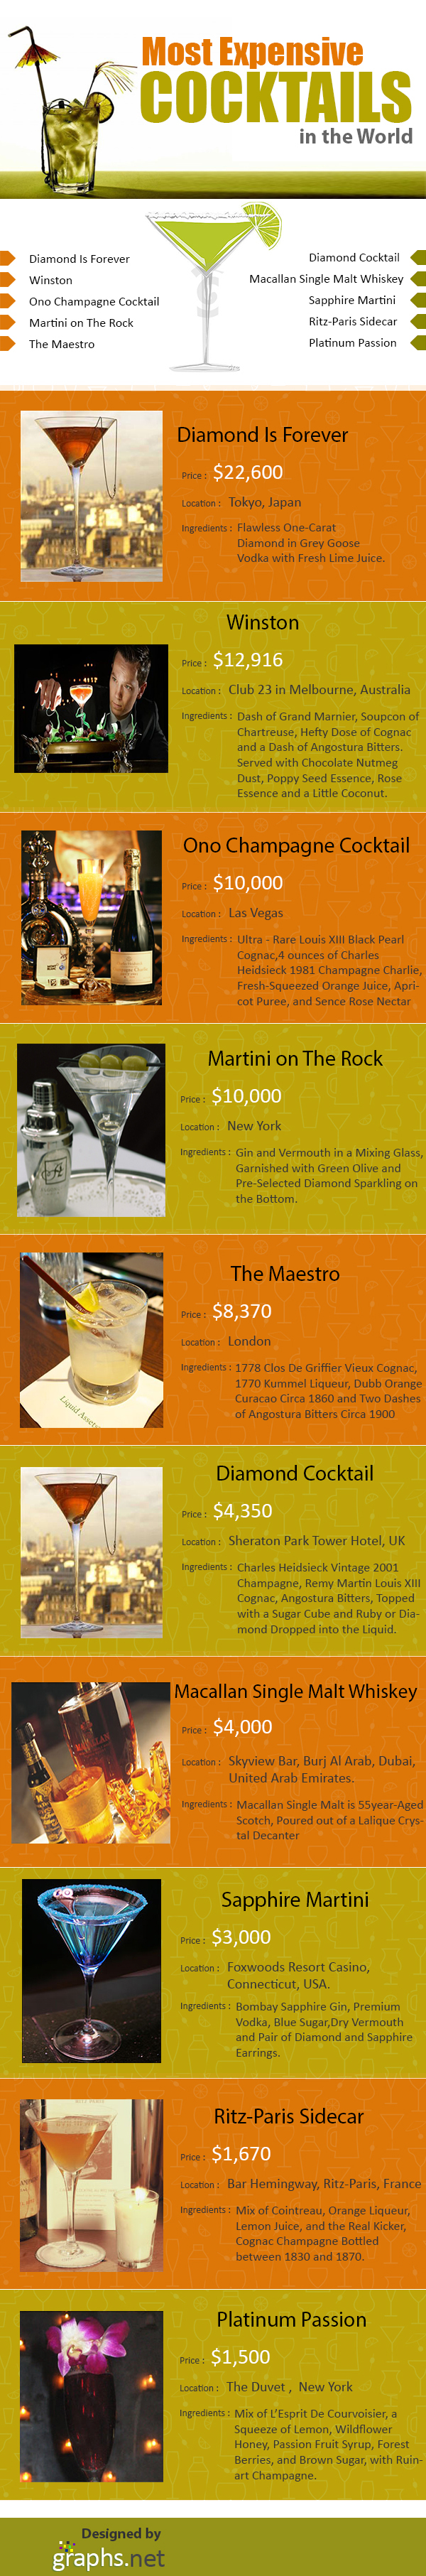 Most Expensive Cocktails in the World 